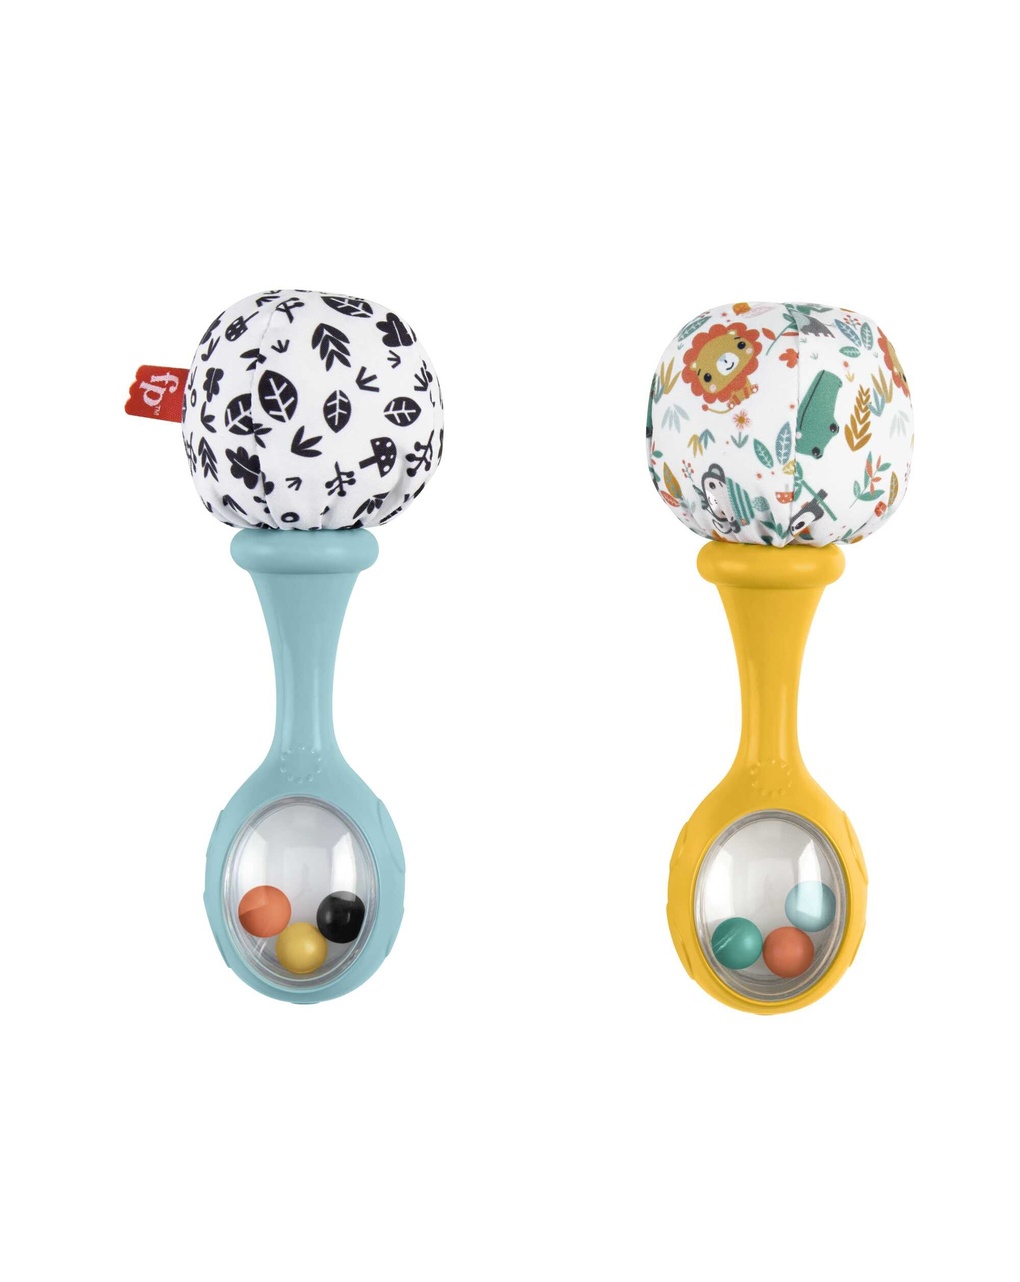 Maracas rattle and play - 3m+ - fisher price - Fisher-Price